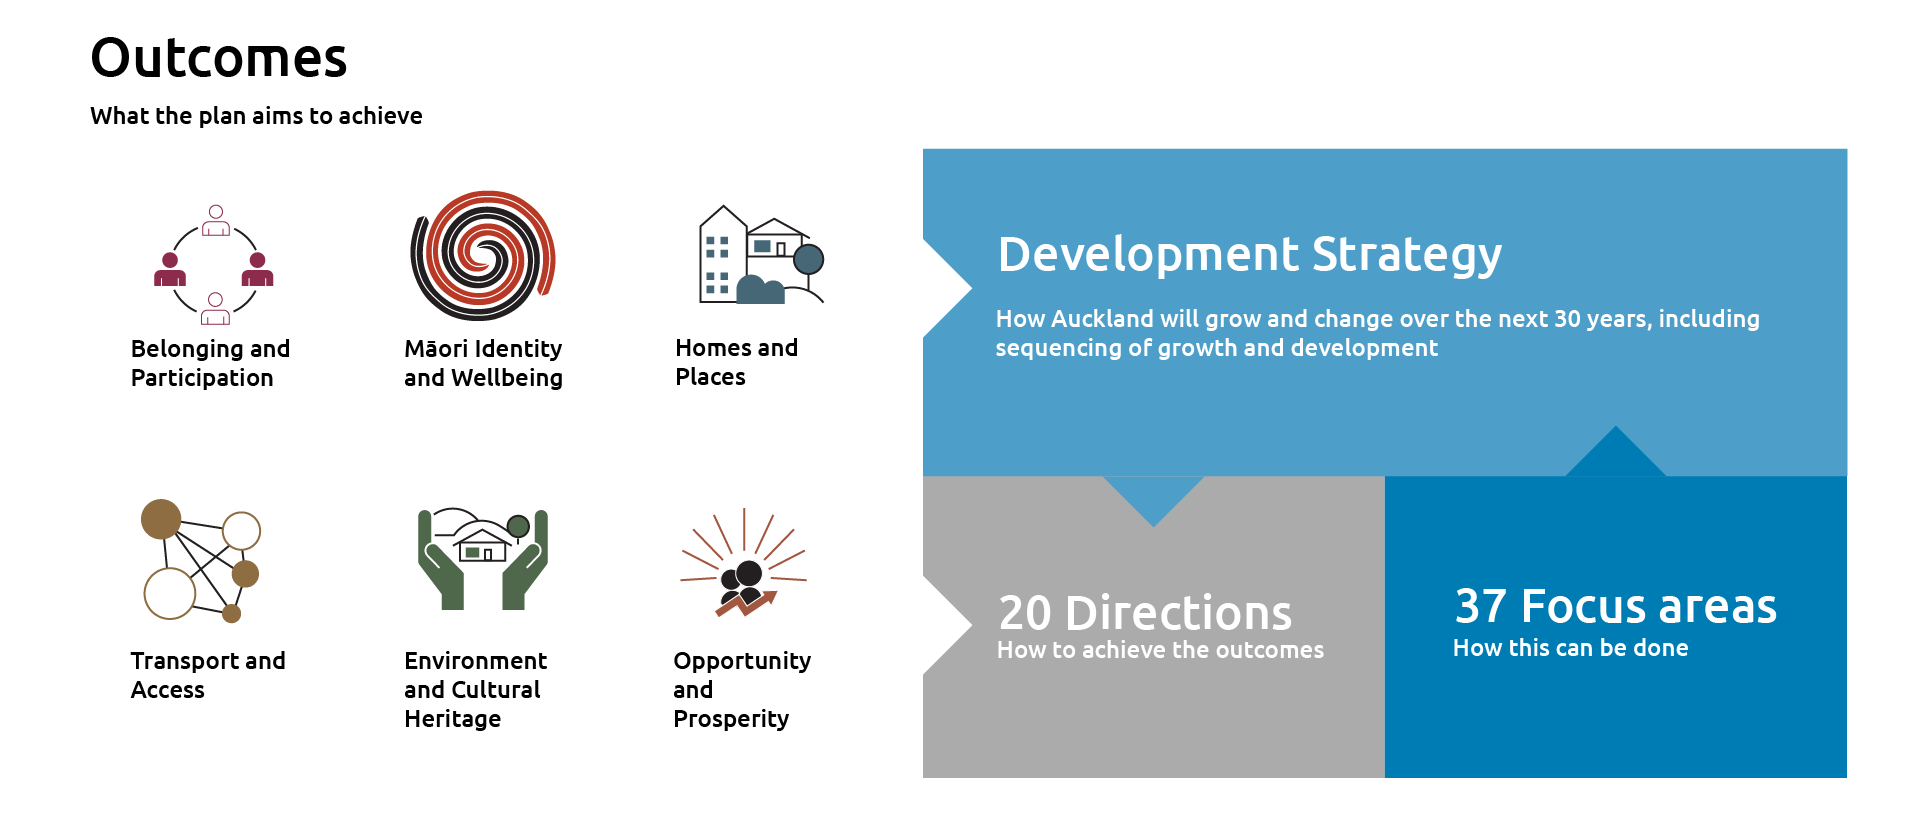 Diagram of the Auckland Plan 2050 framework showing the link between the outcomes, directions, focus areas and development strategy